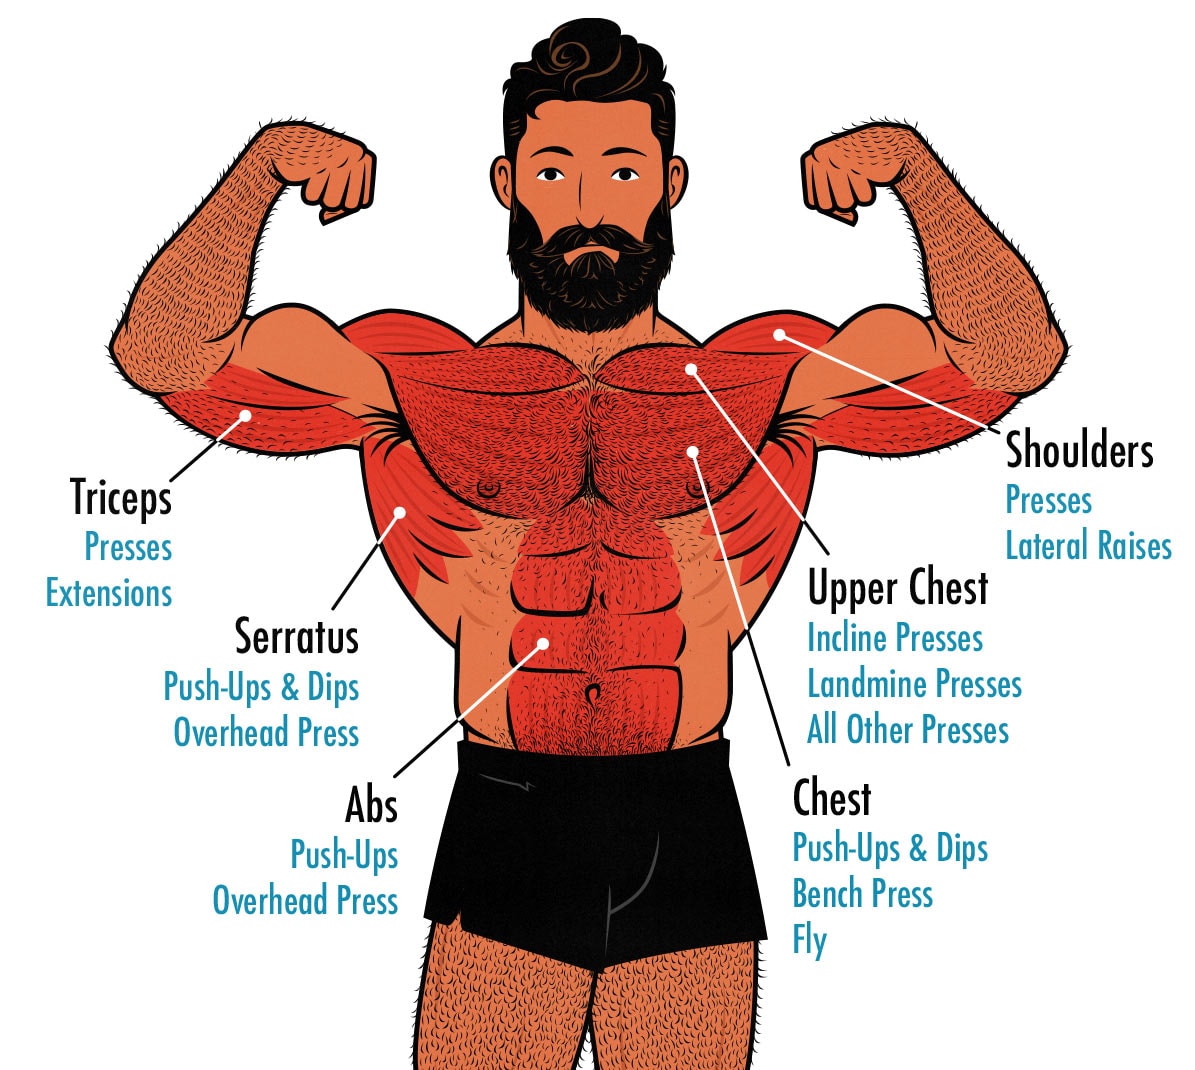 Diagram showing the muscles worked during Chest Day workouts.